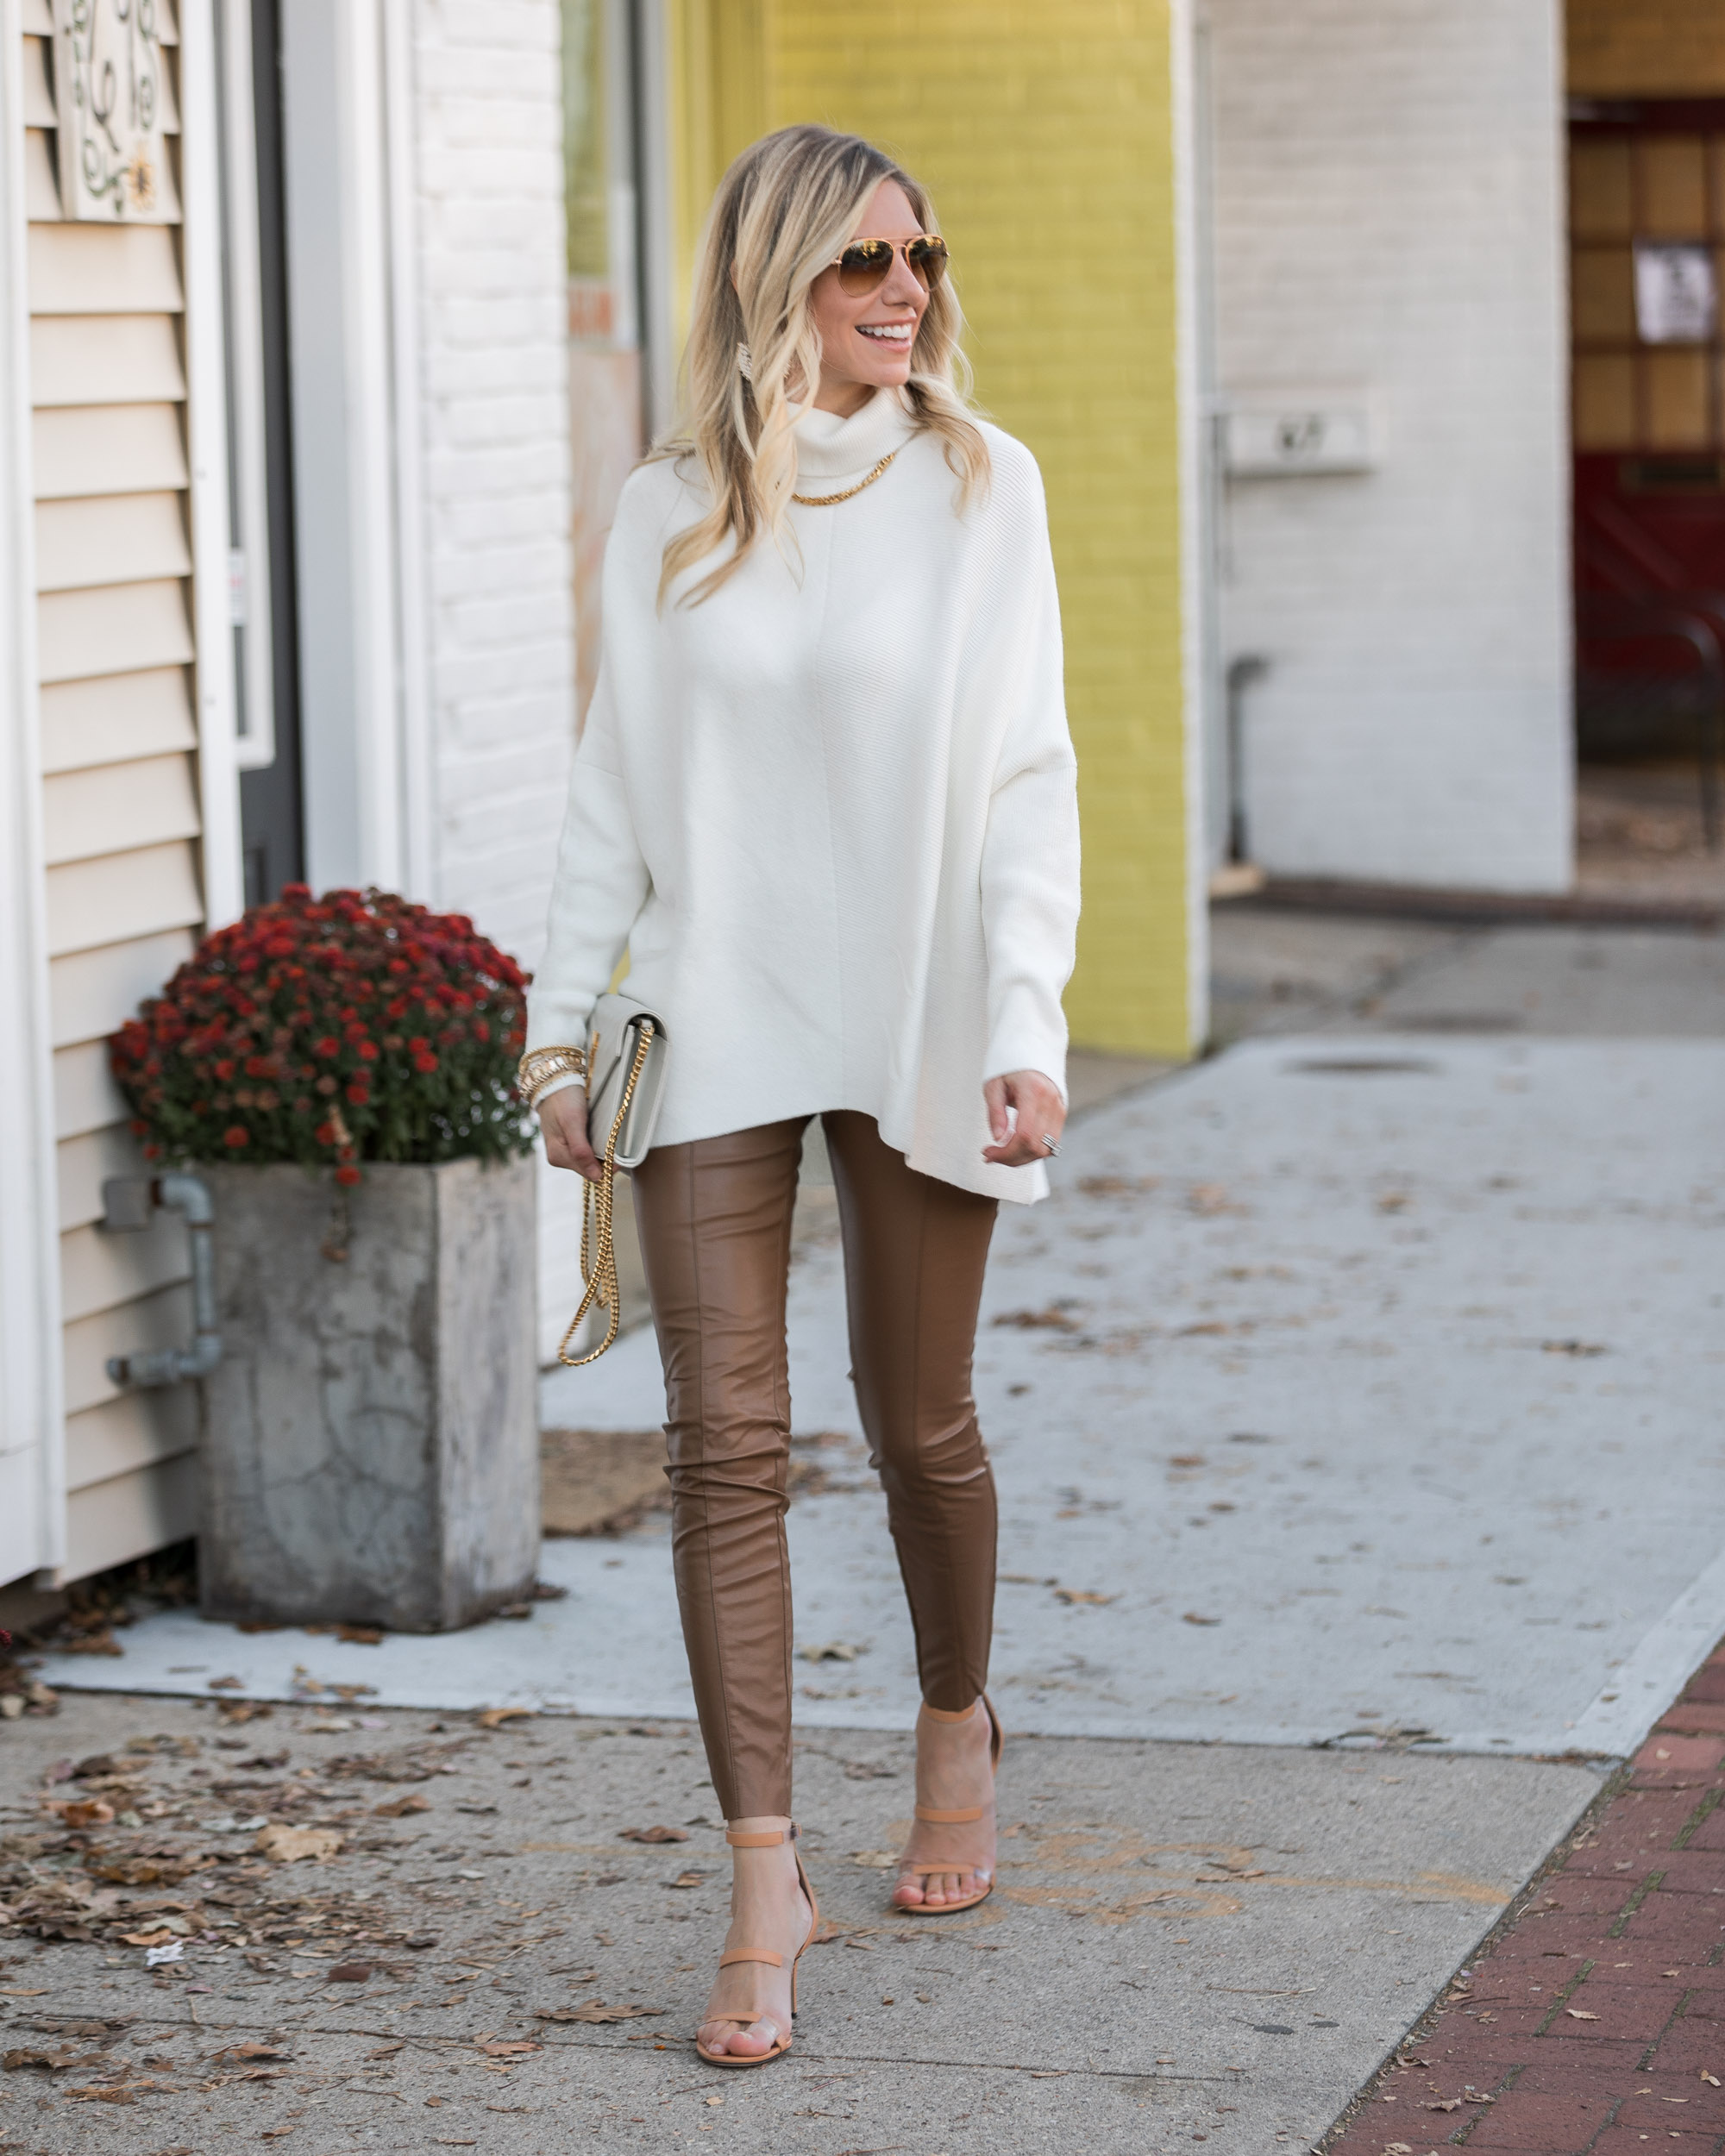 3 Thanksgiving Outfit Ideas - My Styled Life